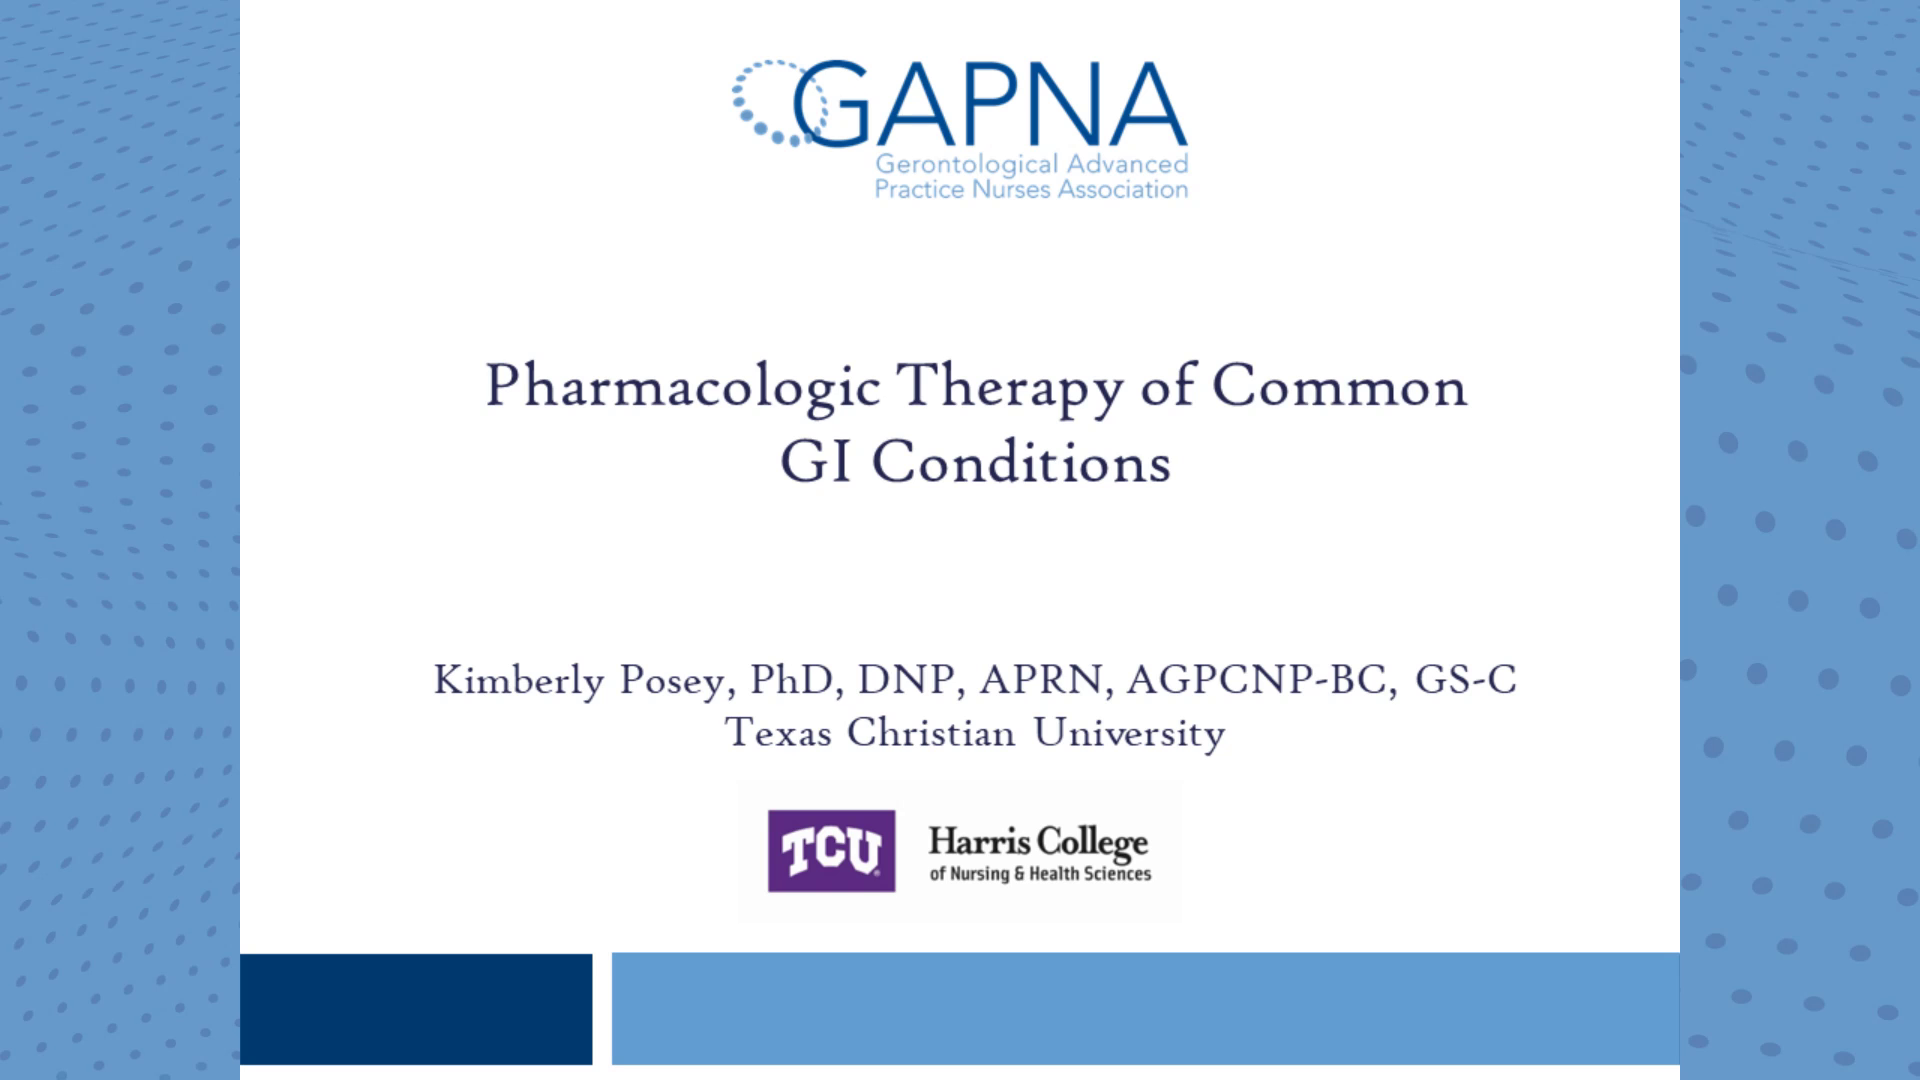 Pharmacologic Therapy for Common Gastrointestinal Conditions